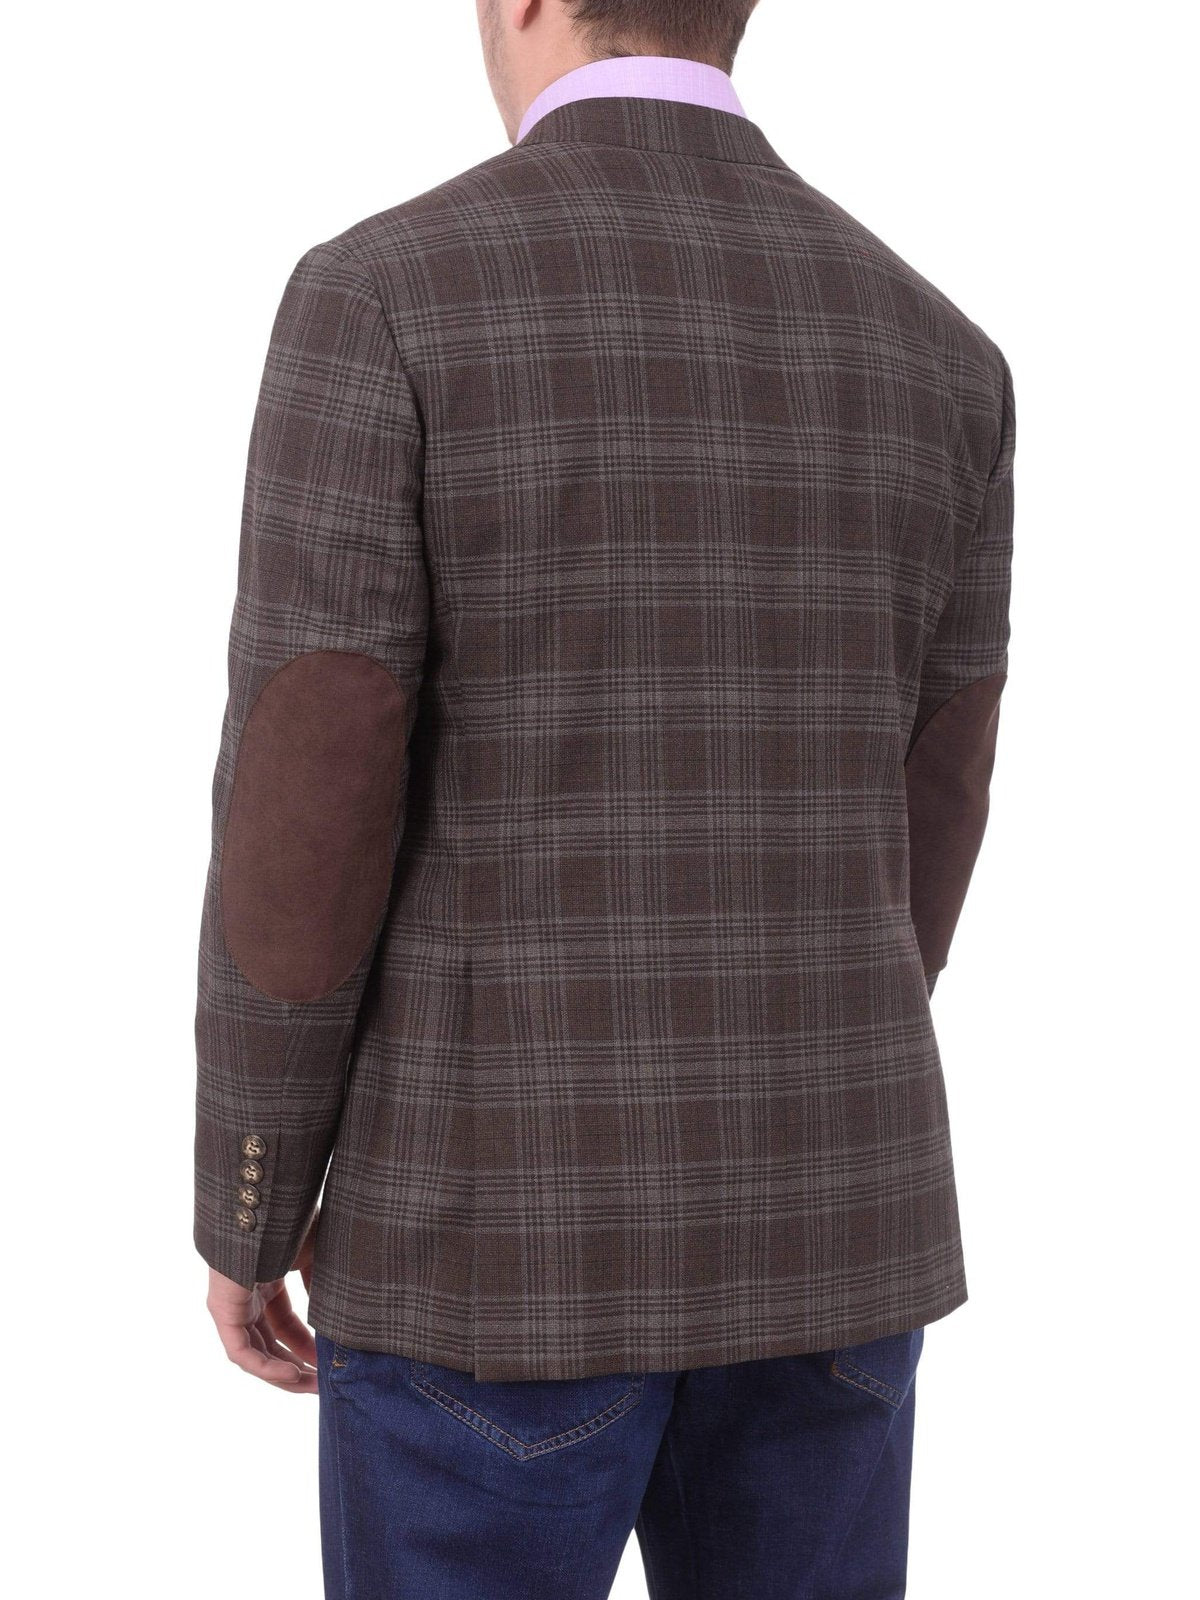 Napoli BLAZERS Mens Napoli Brown Plaid Half Canvassed Wool Blazer Sportcoat With Elbow Patches